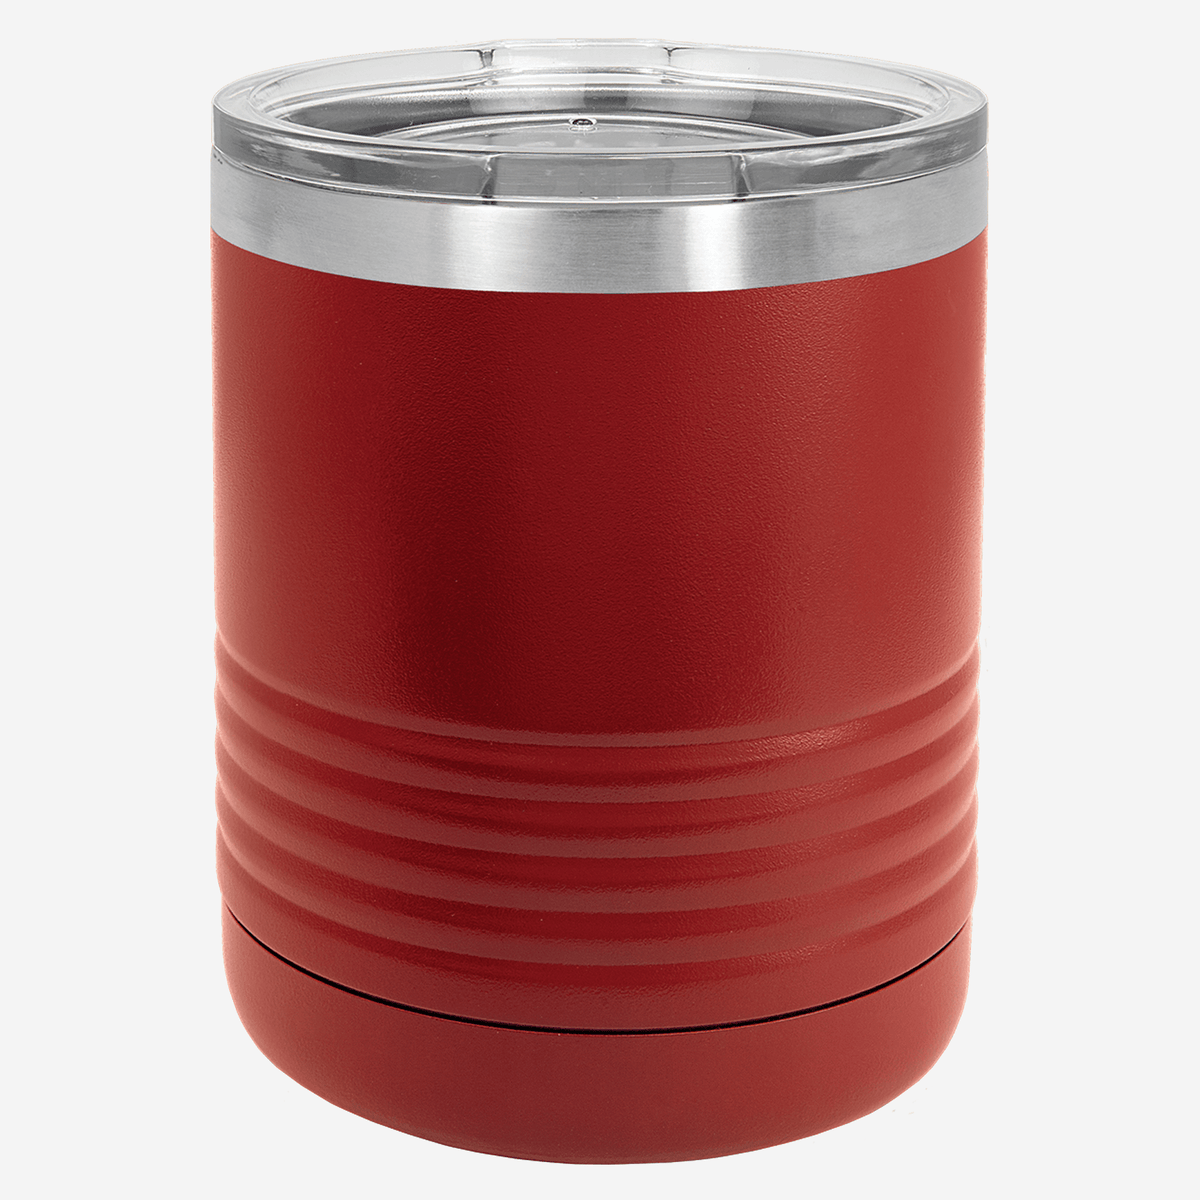 10 oz red tumbler with lid grip rings on the bottom